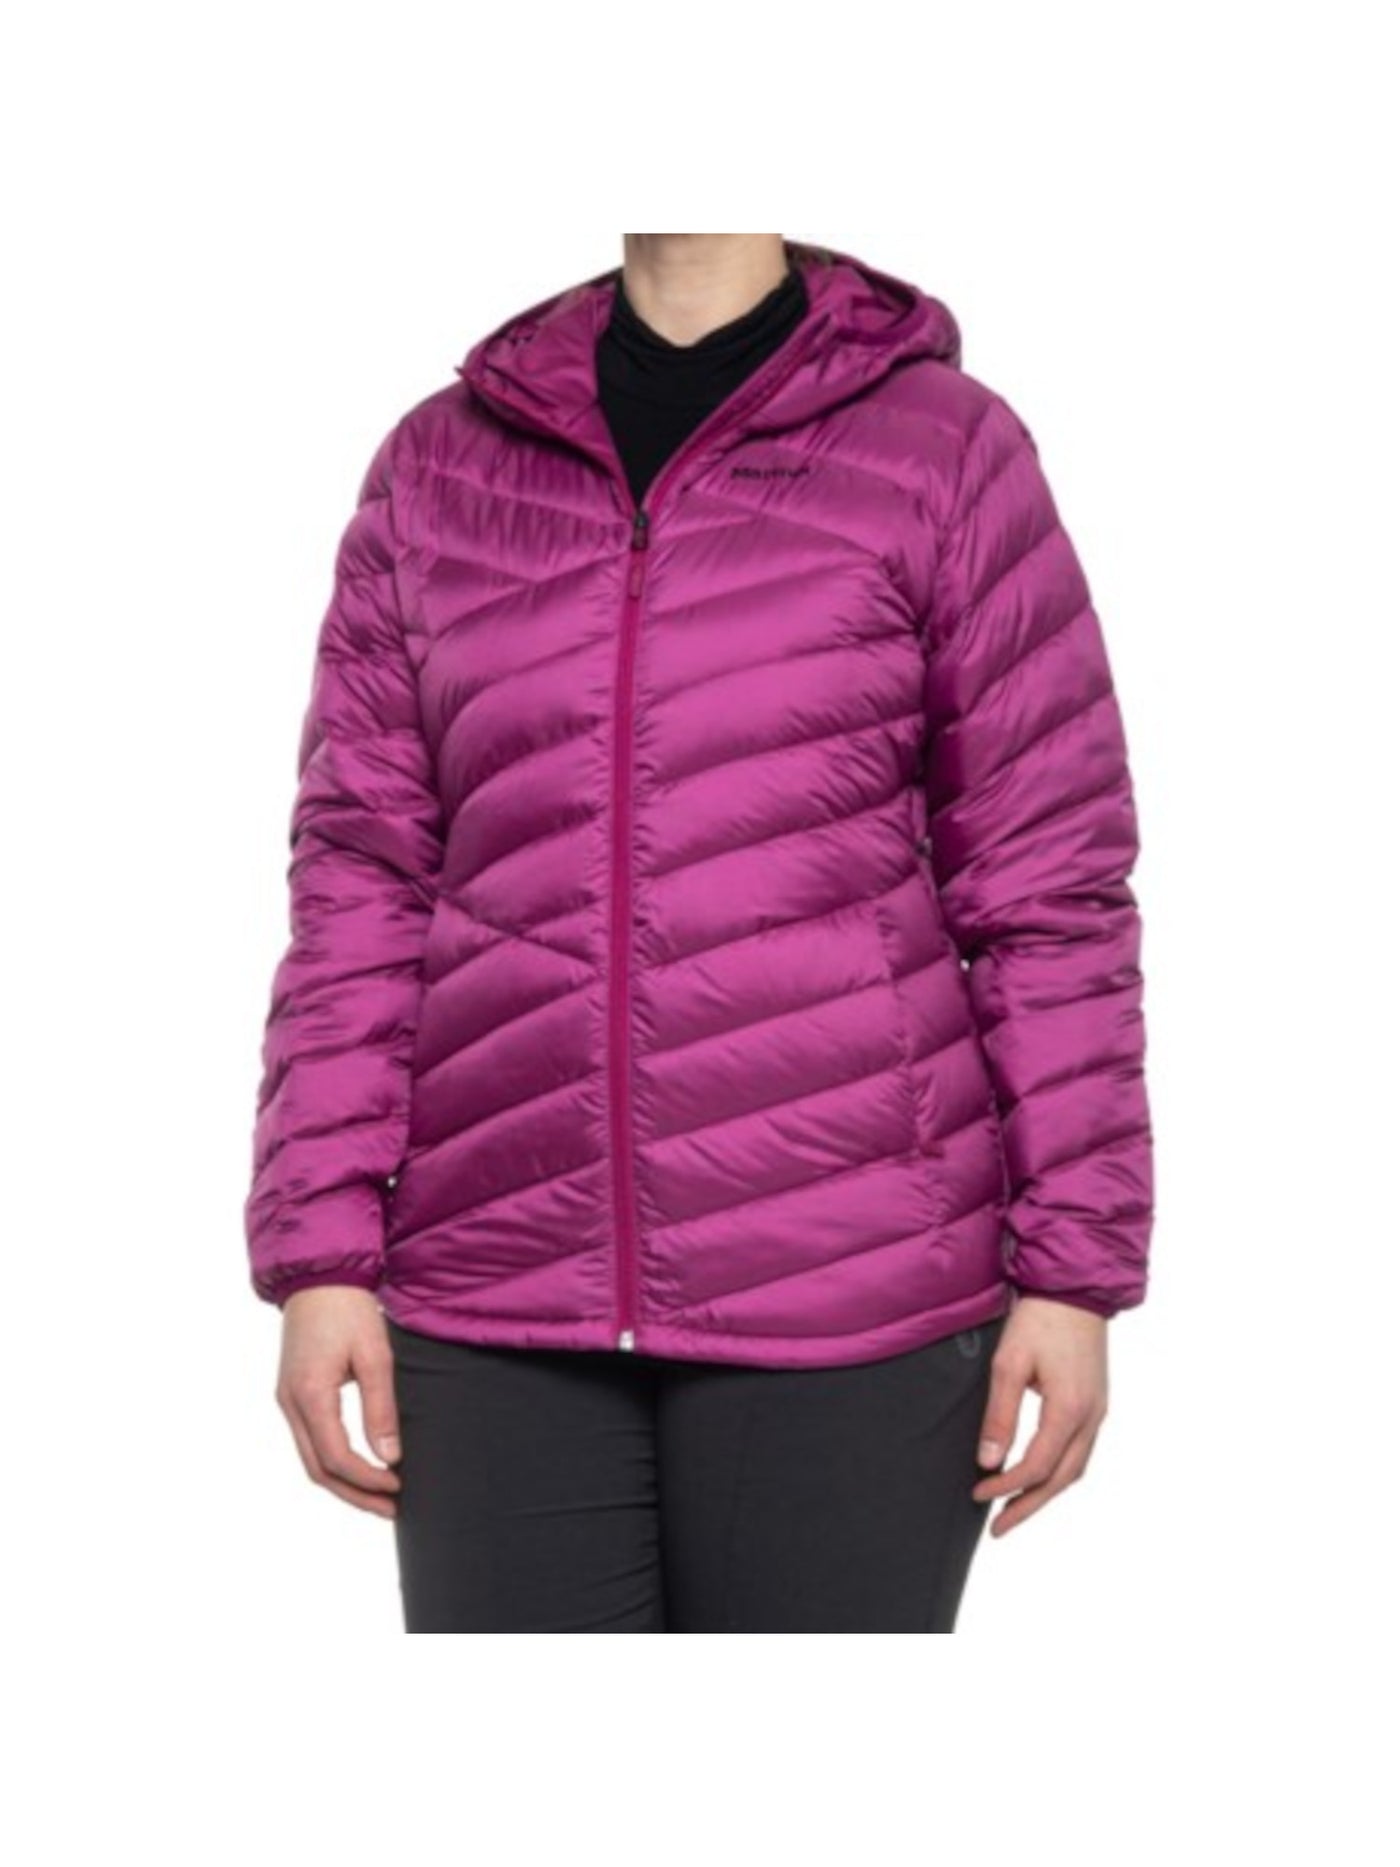 MARMOT Womens Pink Zippered Pocketed Wind Resistant Insulated Hooded Jacket L